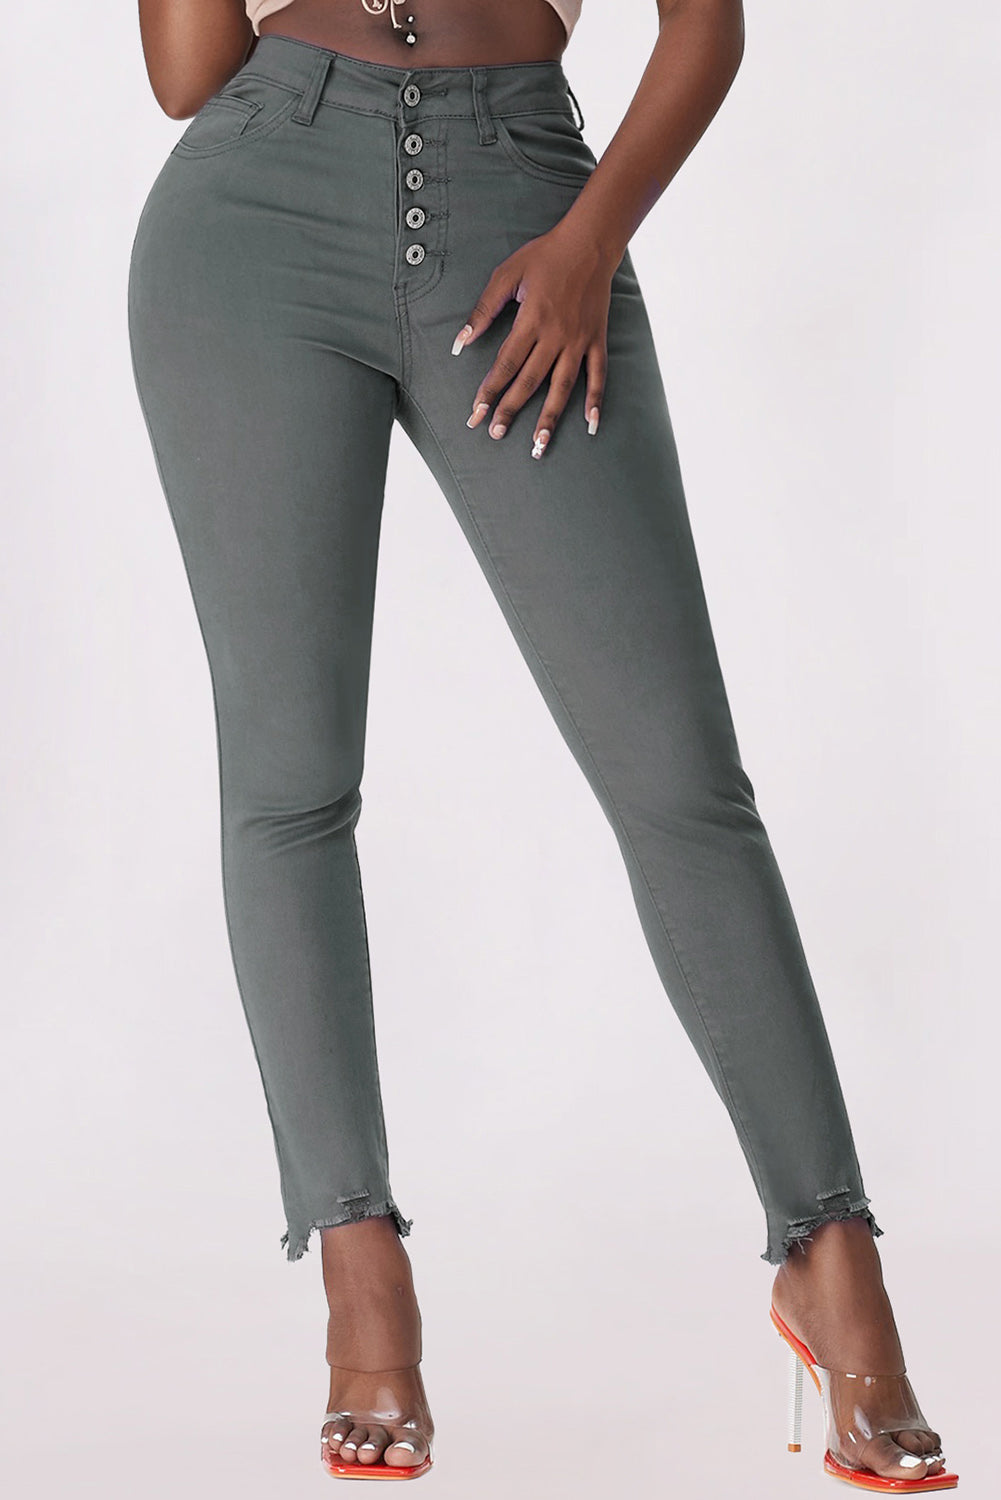 Women's High Rise Distressed Stretch Skinny Jeans - Plus Size